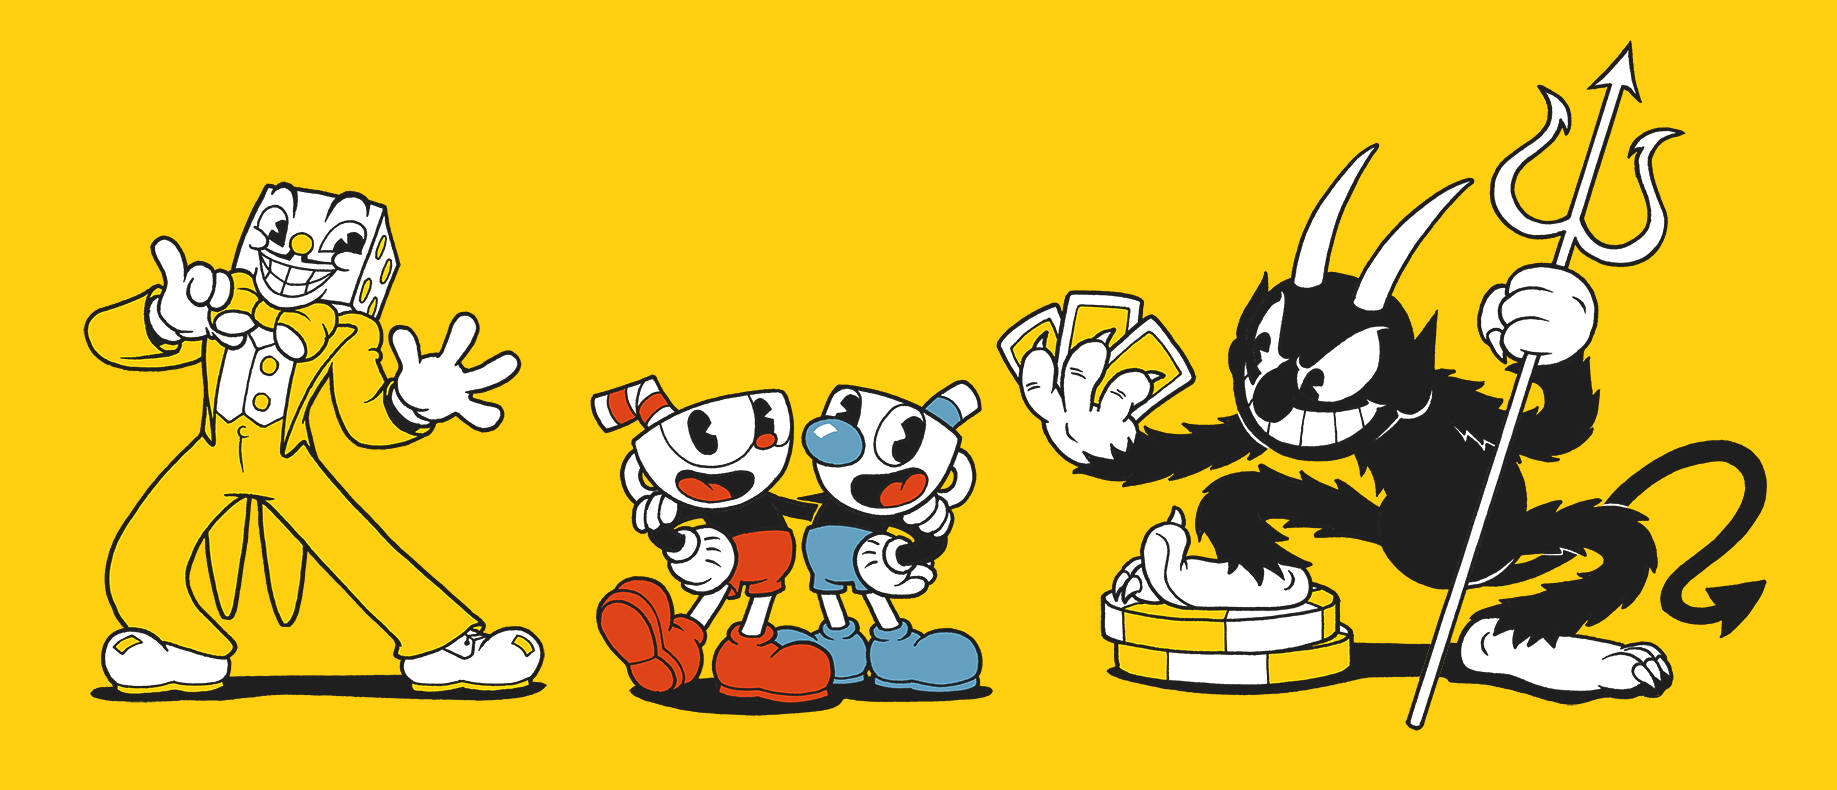 Vivid Cuphead Poster In Yellow Background